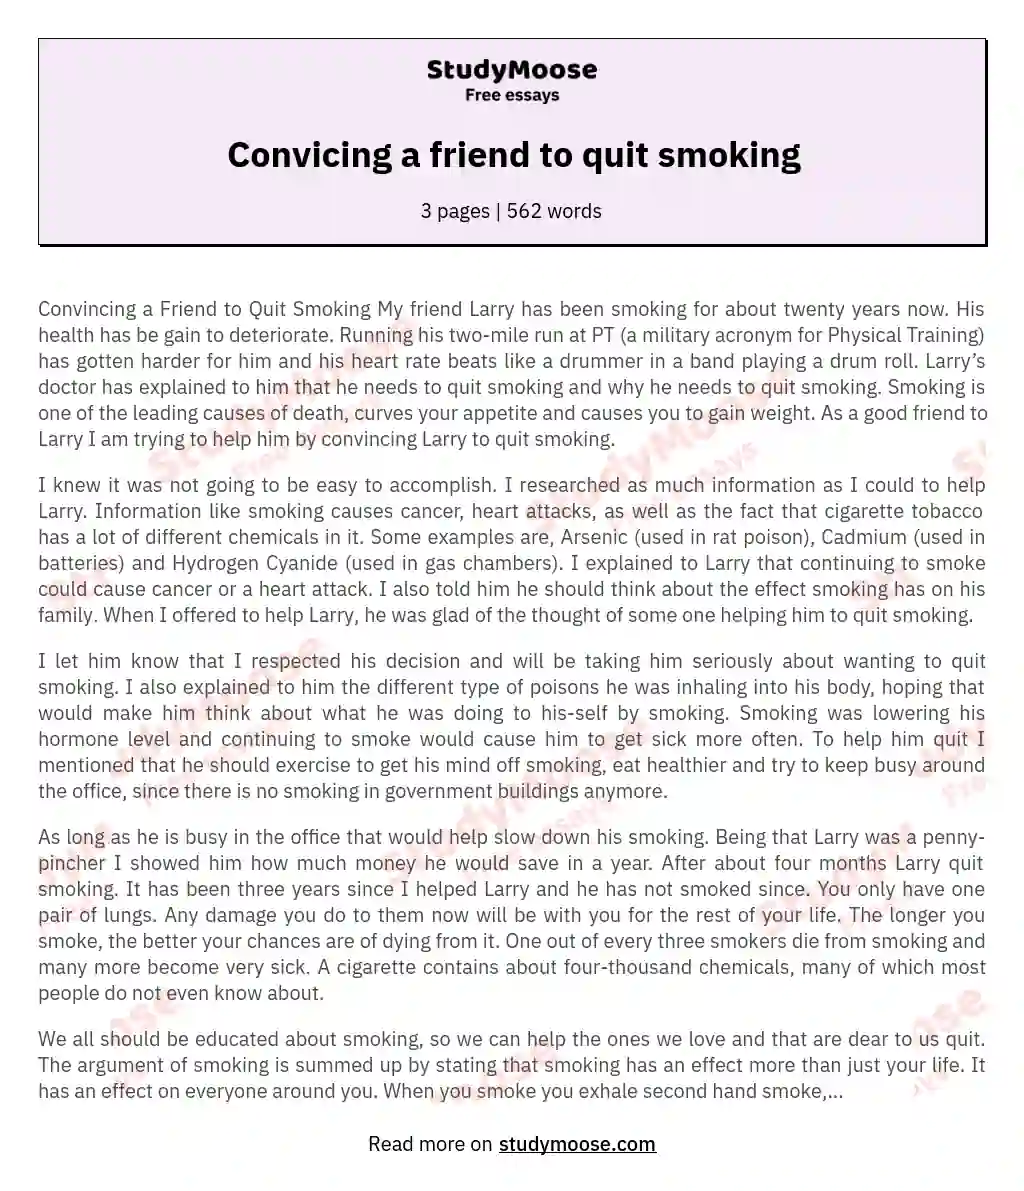 Convicing a friend to quit smoking essay